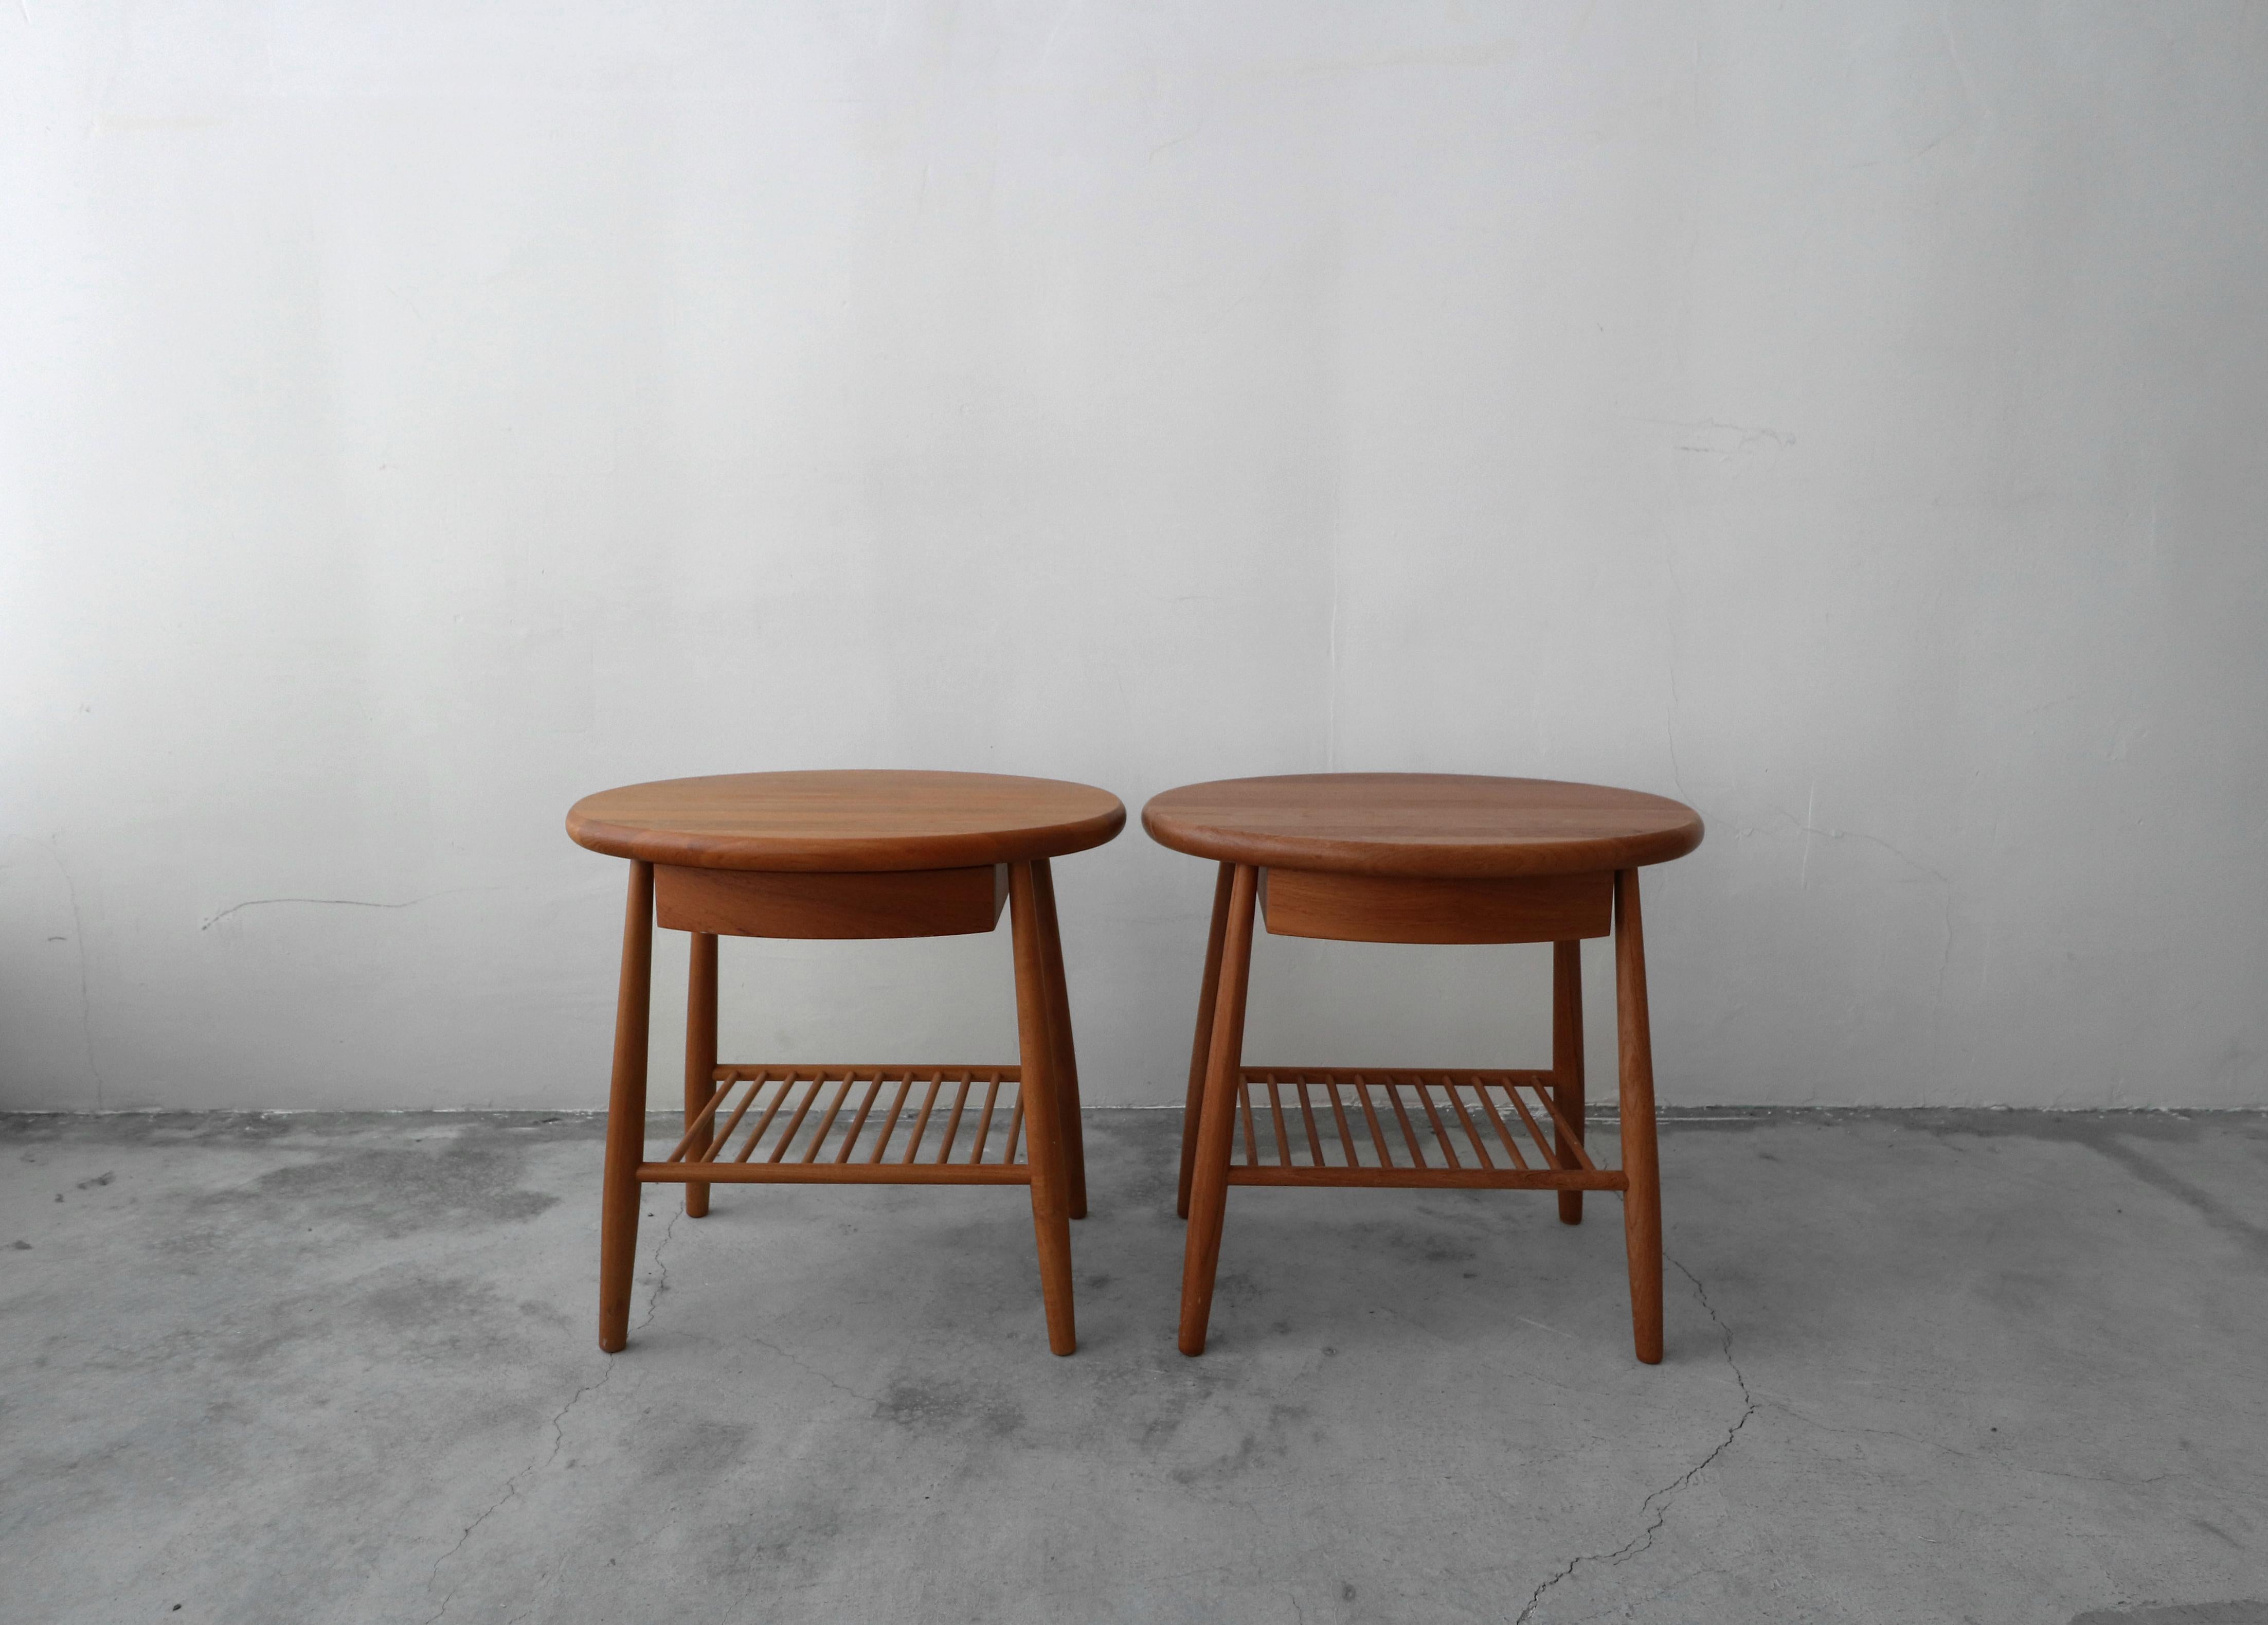 Pair of midcentury Danish tiered side tables. Sophisticated and simple, their sleek design has the perfect Danish details. Each table is constructed of solid teak, with a unique oval shape top, doweled bottom shelf and a small drawer. Tables are in